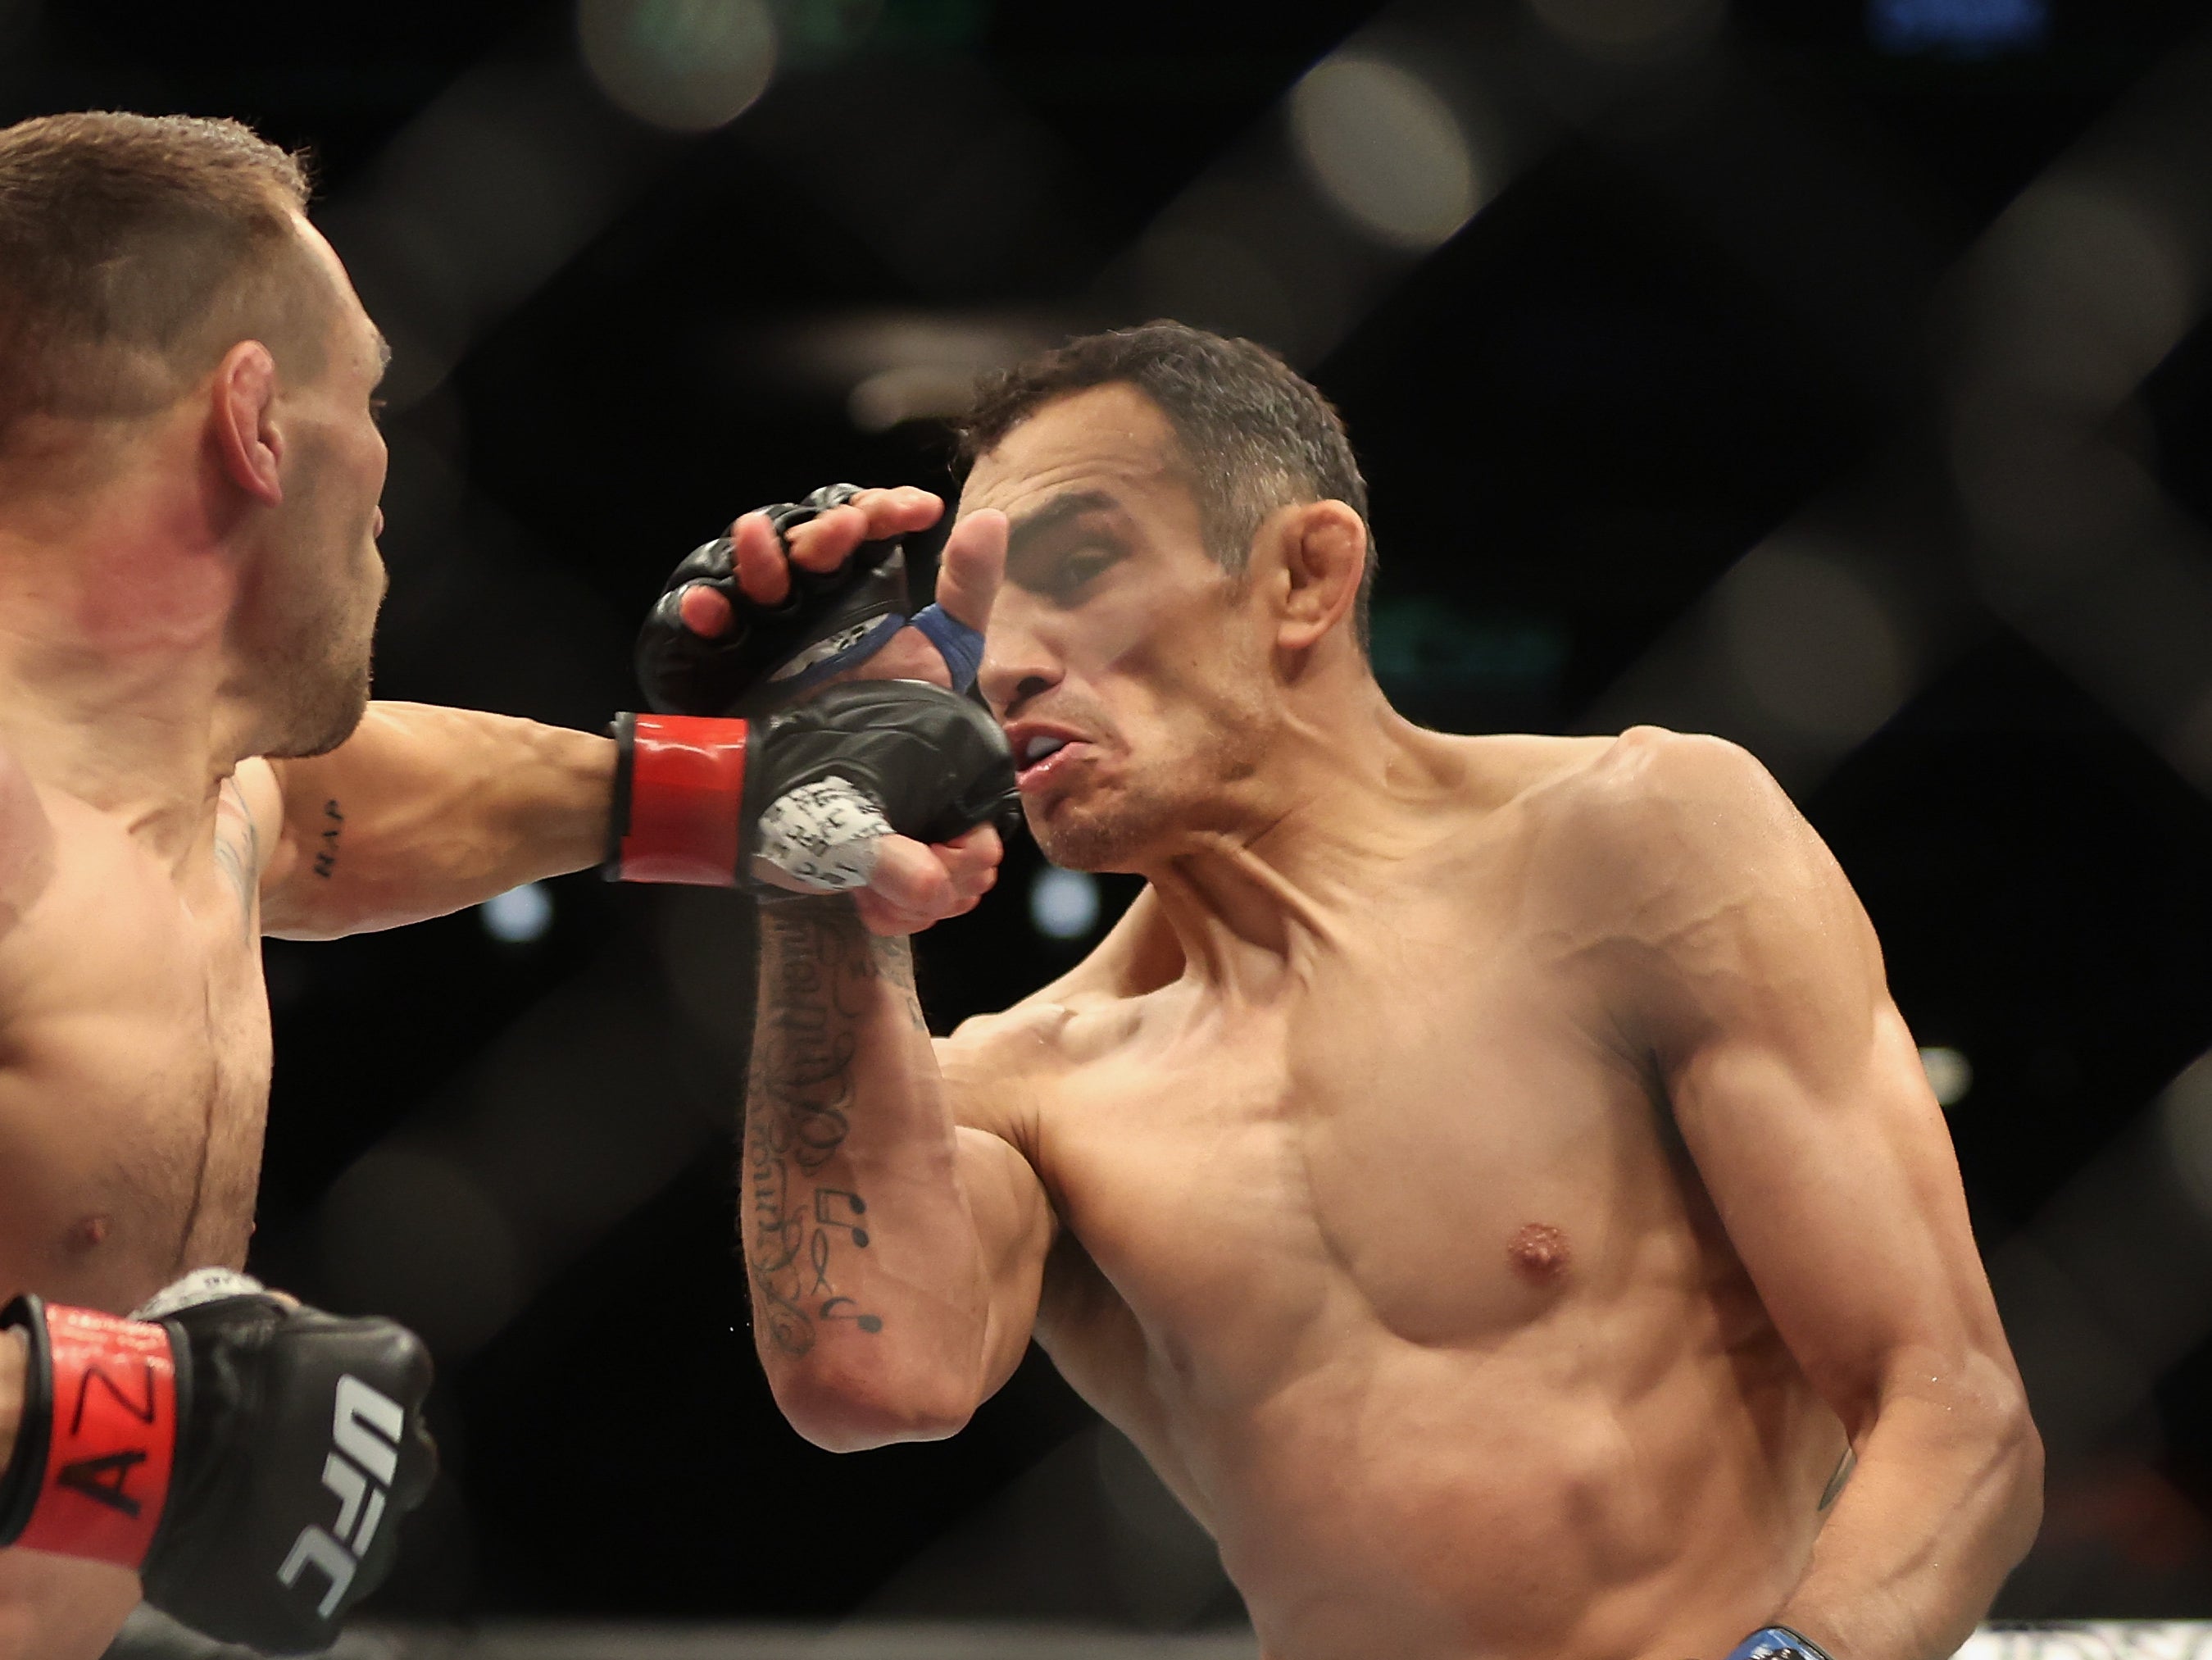 Tony Ferguson (right) during his loss to Michael Chandler at UFC 274